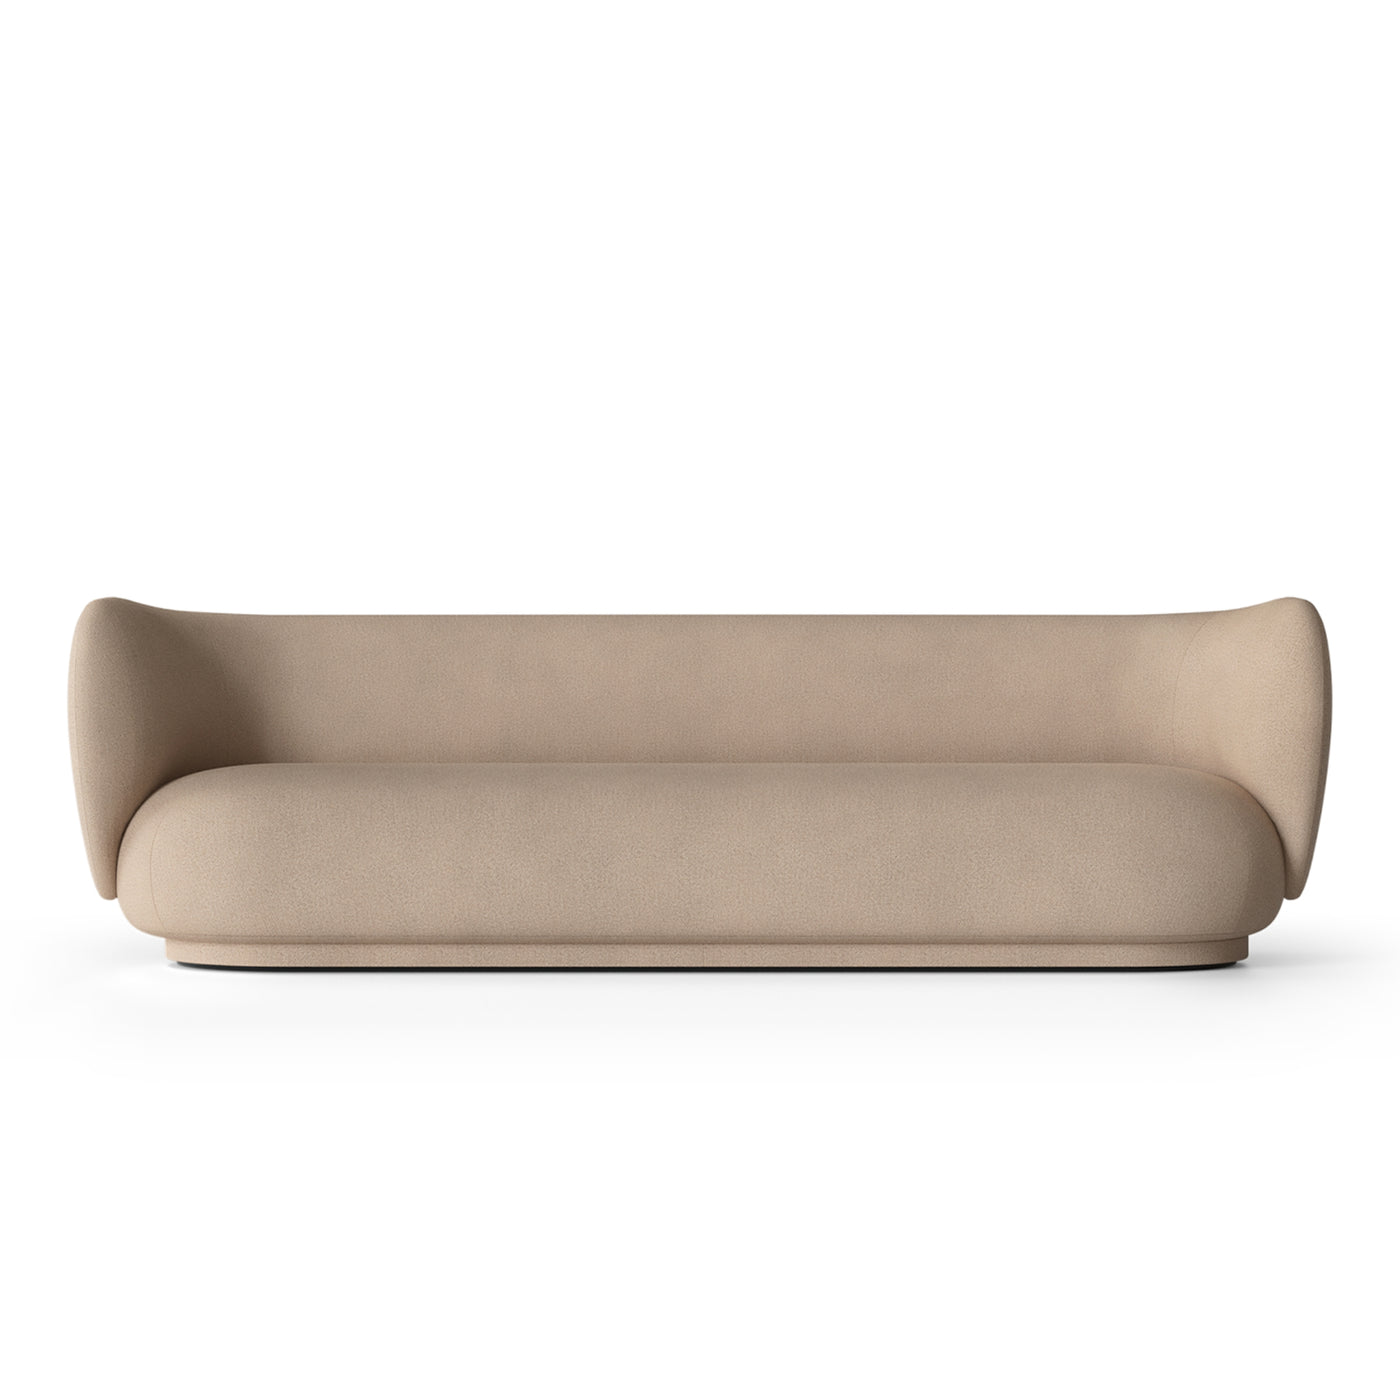 ferm LIVING Rico 4 seater sofa. Made to order from someday designs. #colour_sand-soft